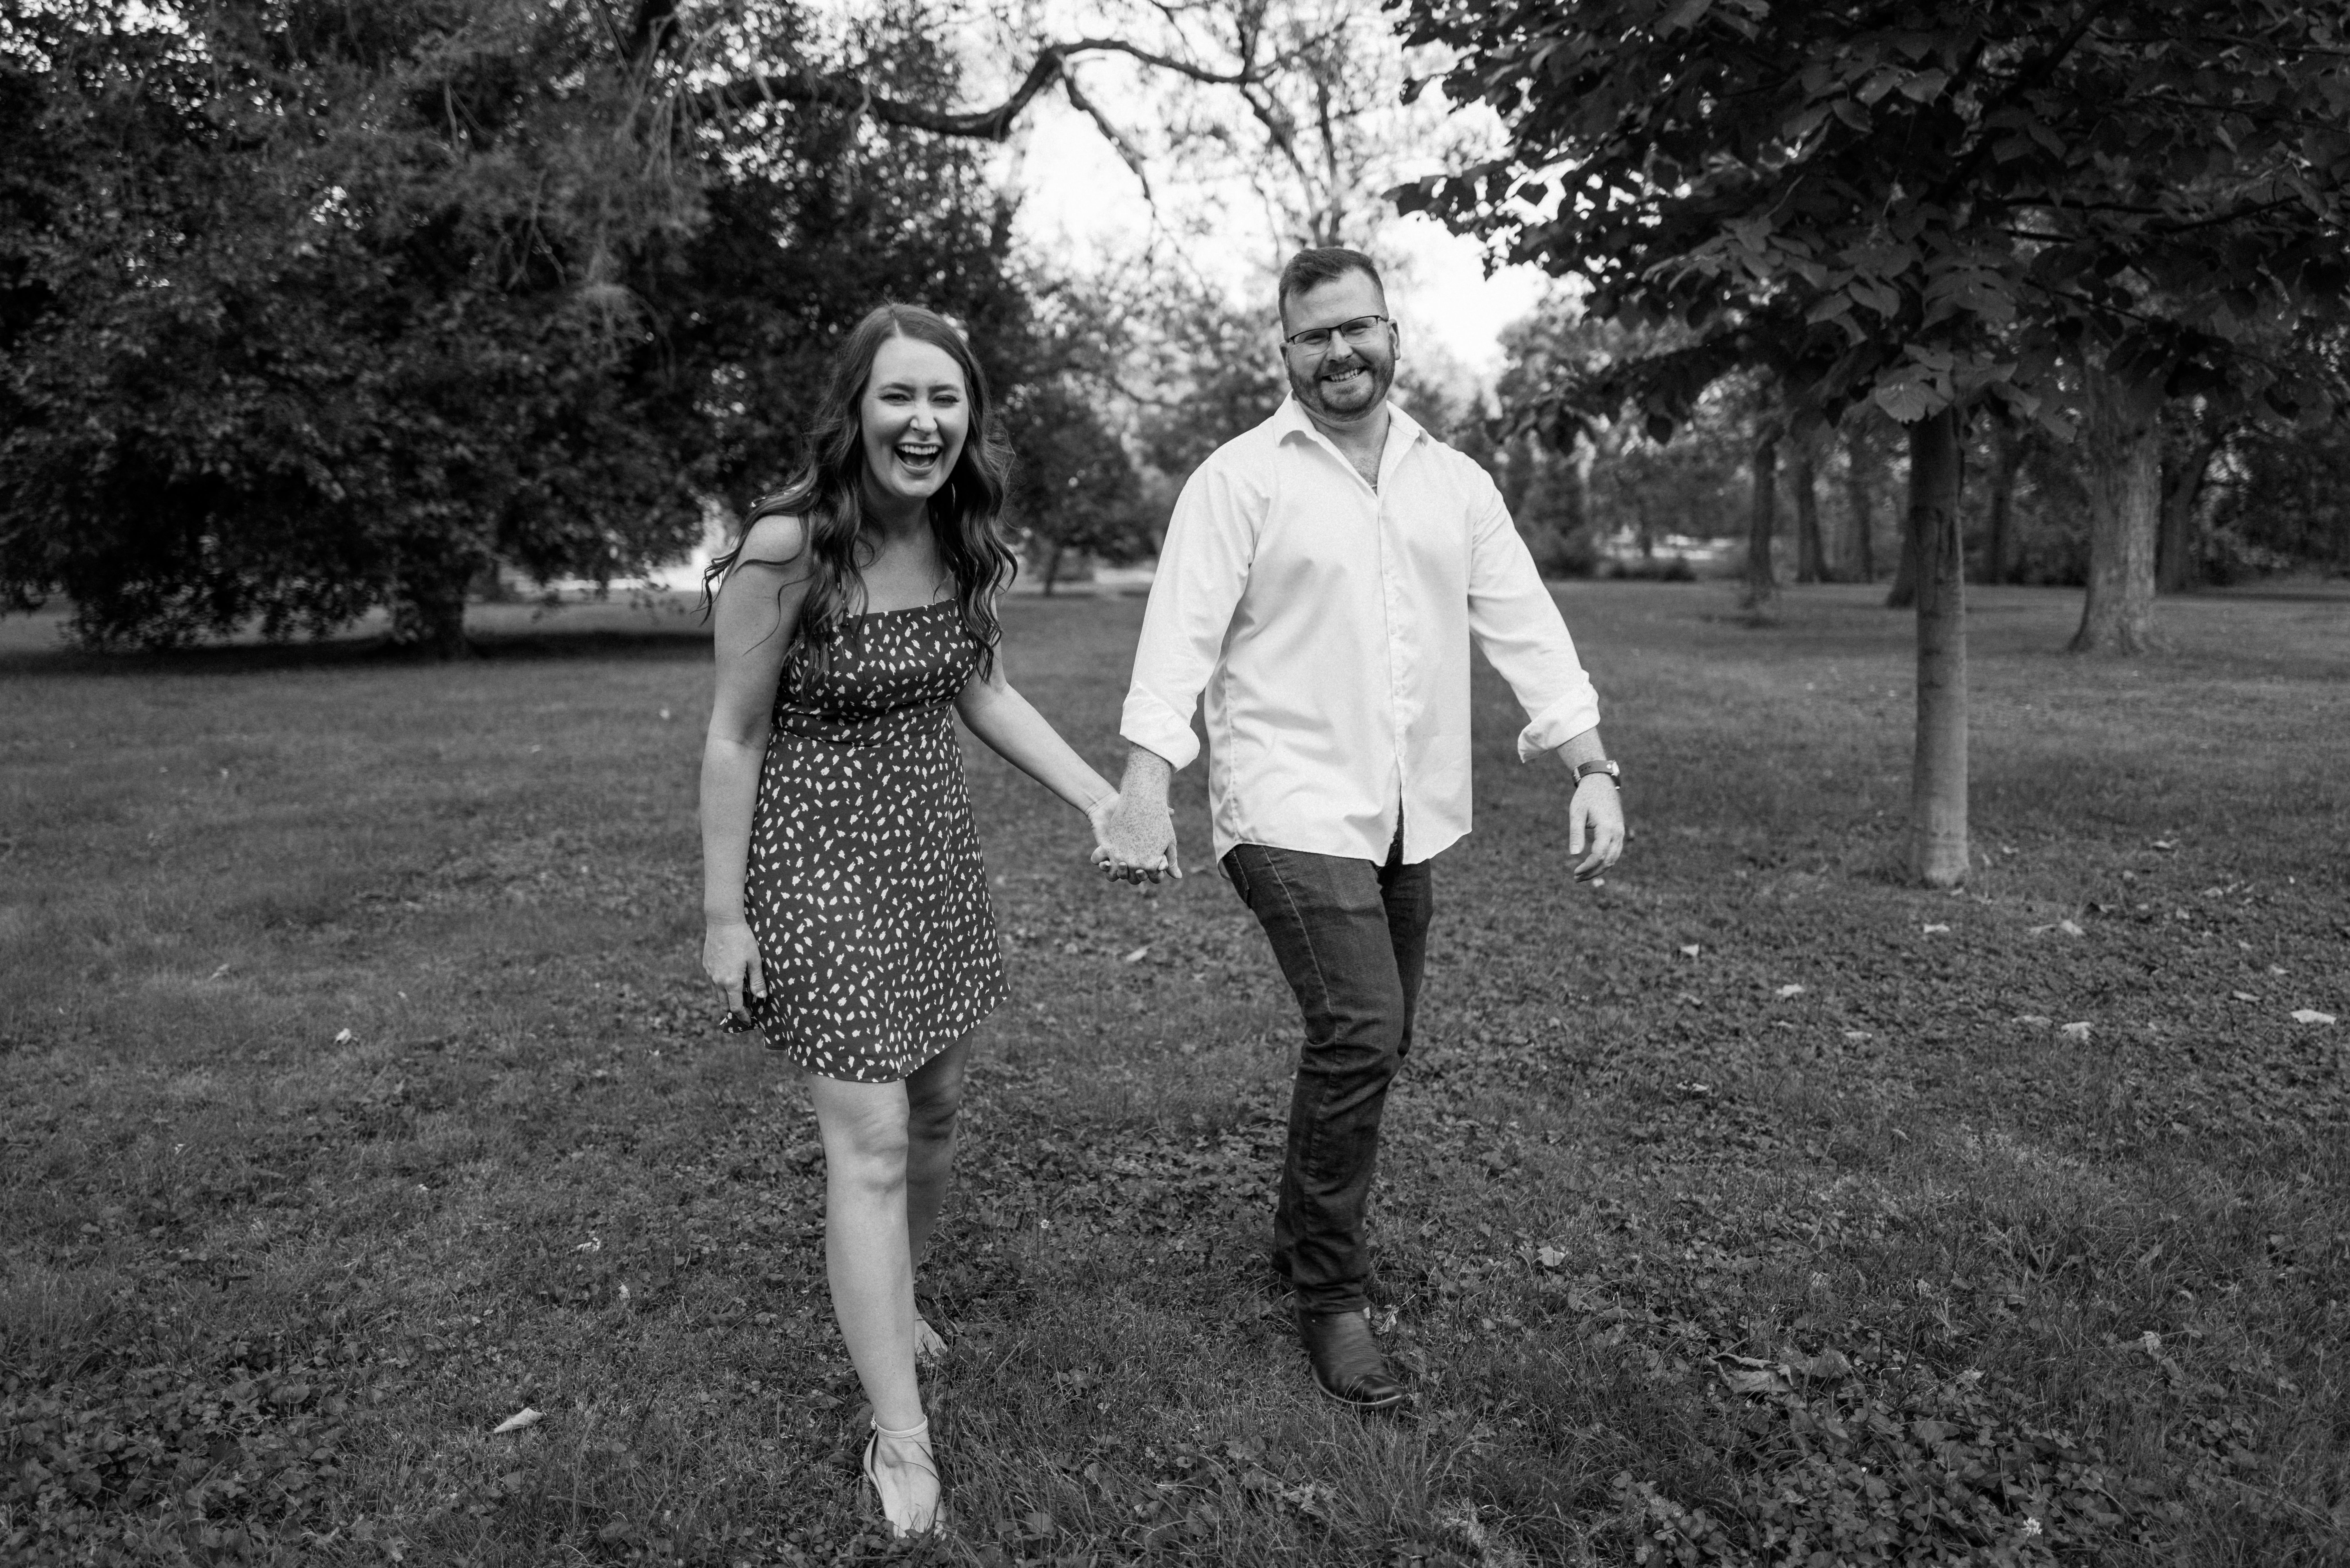 Engagement session in Tower Grove Park, St. Louis. Couple photos in a dress outfit with their German shepherd dog. Engagement photos with dogs are the best!